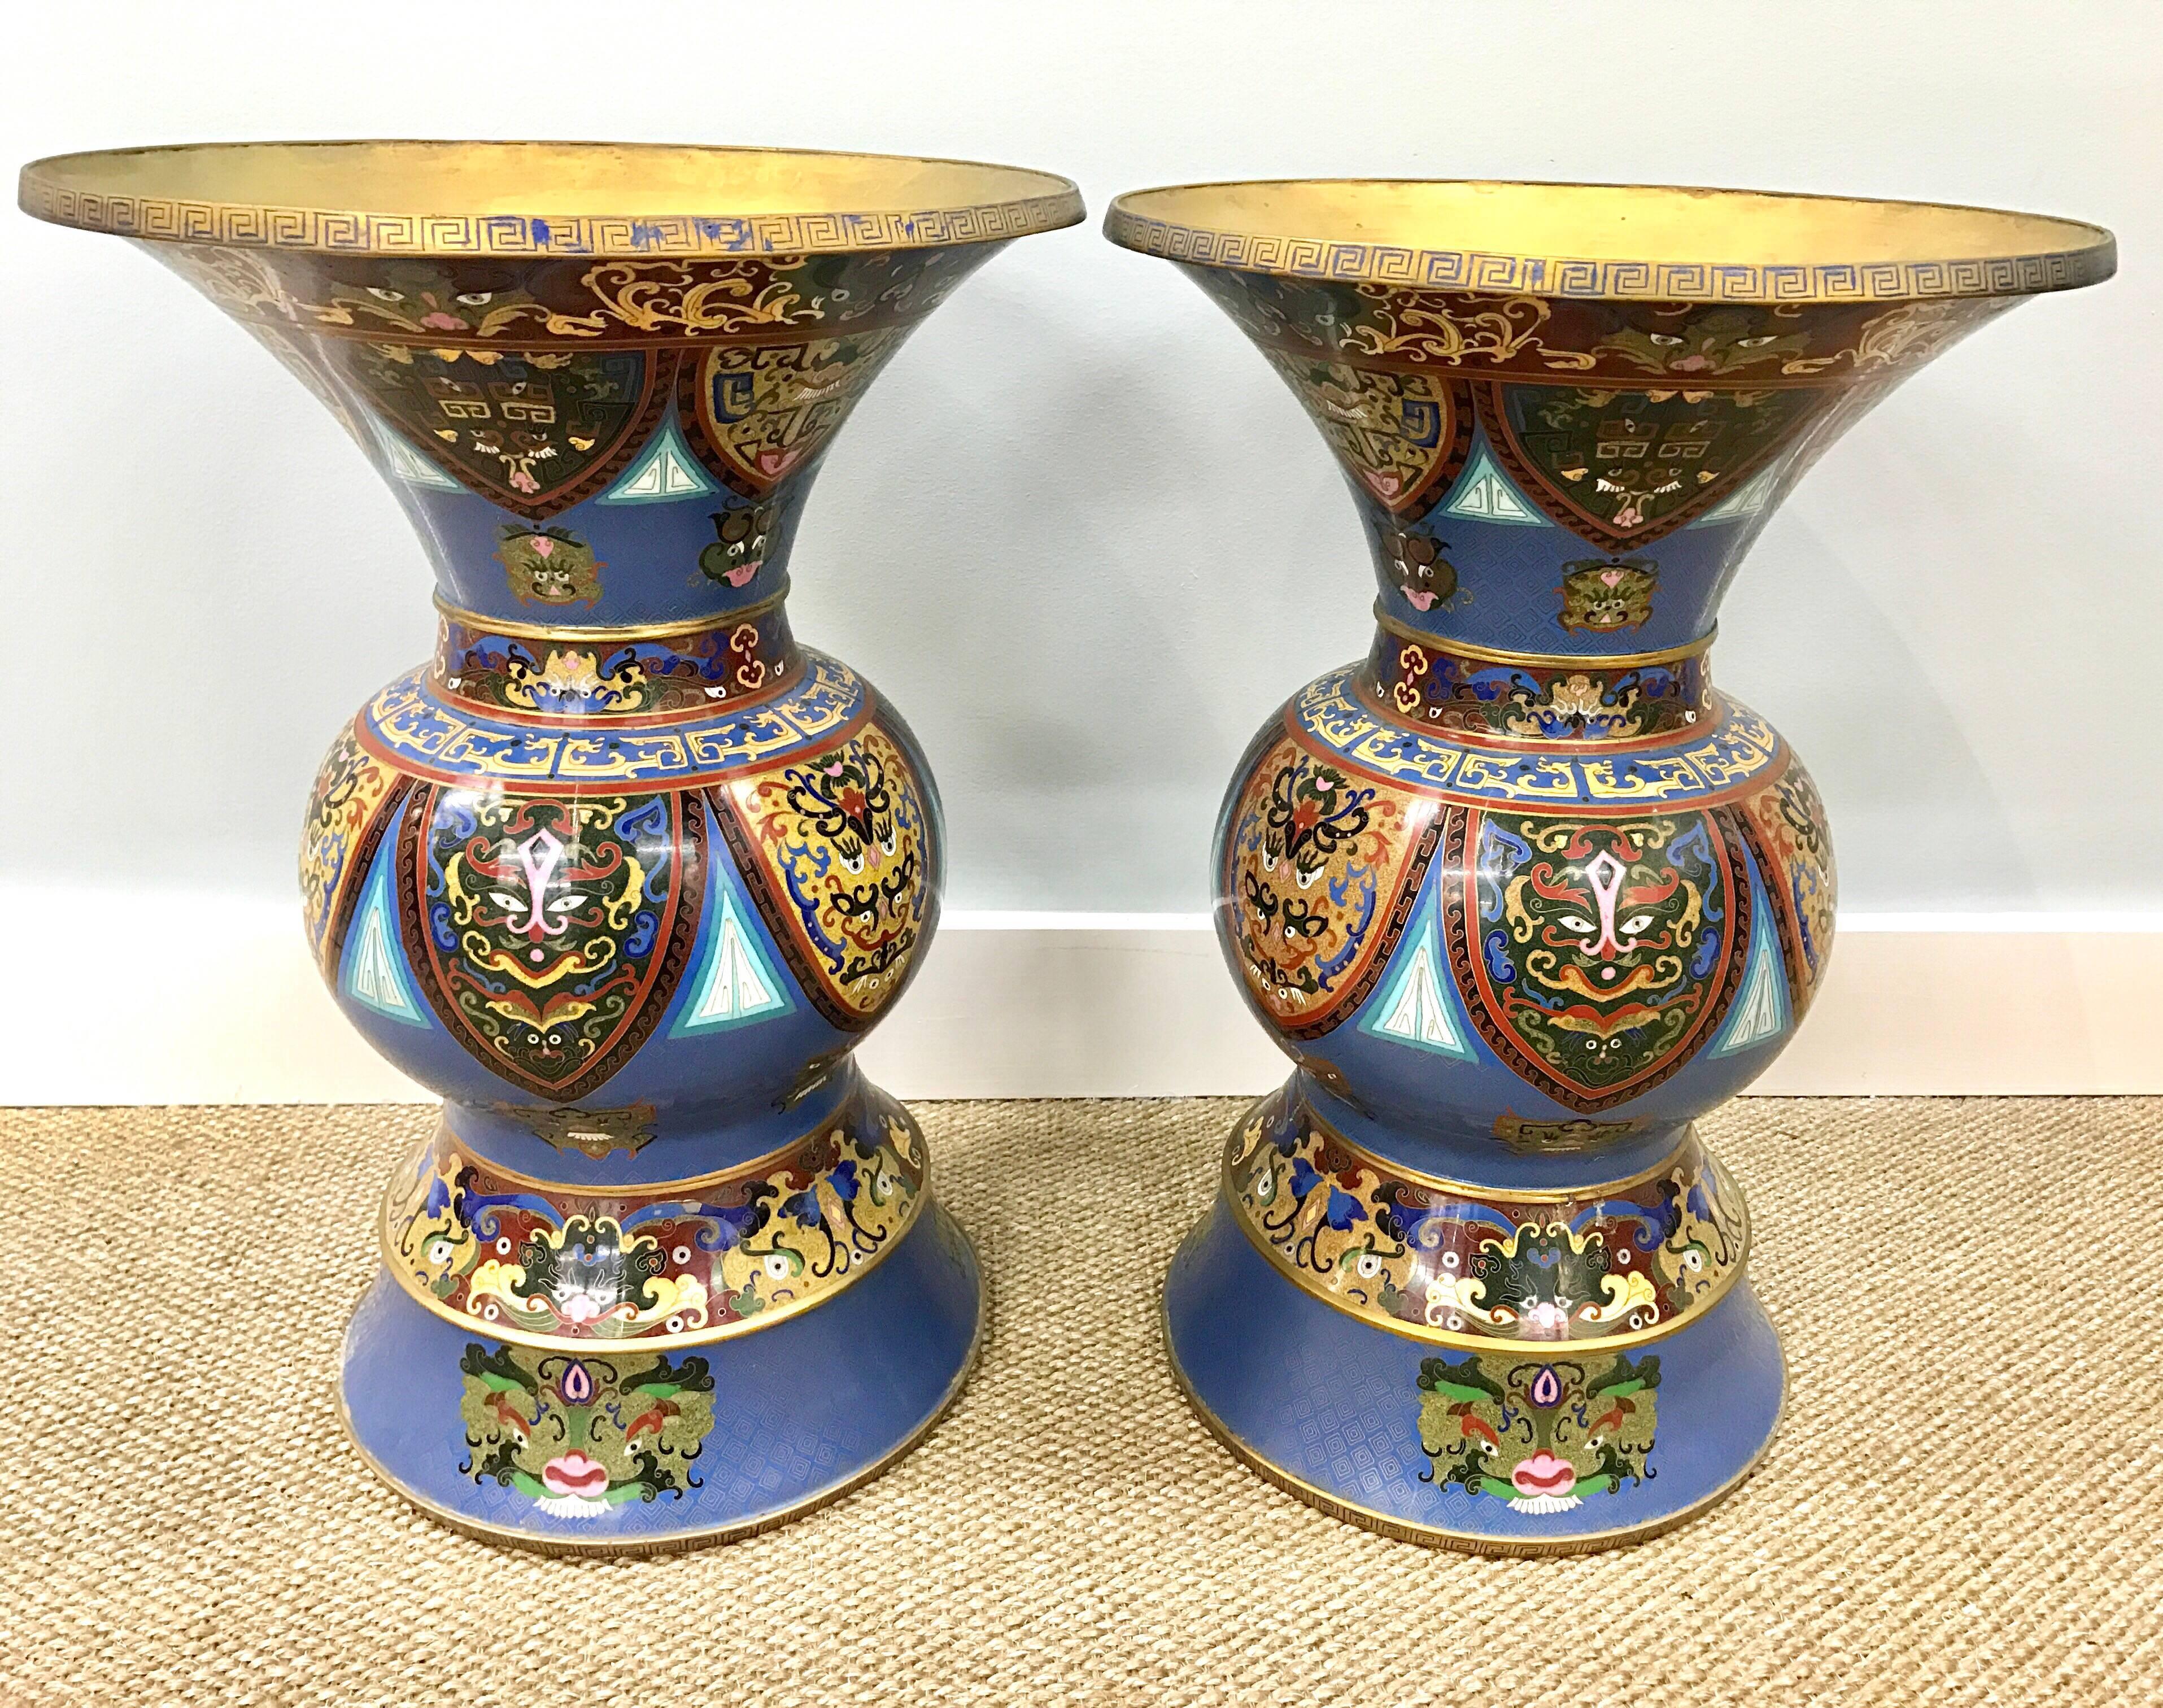 Unusually shaped pair of matching cloisonné enameled Chinese urns or vases decorated with animal and dragon faces. The scale is large.